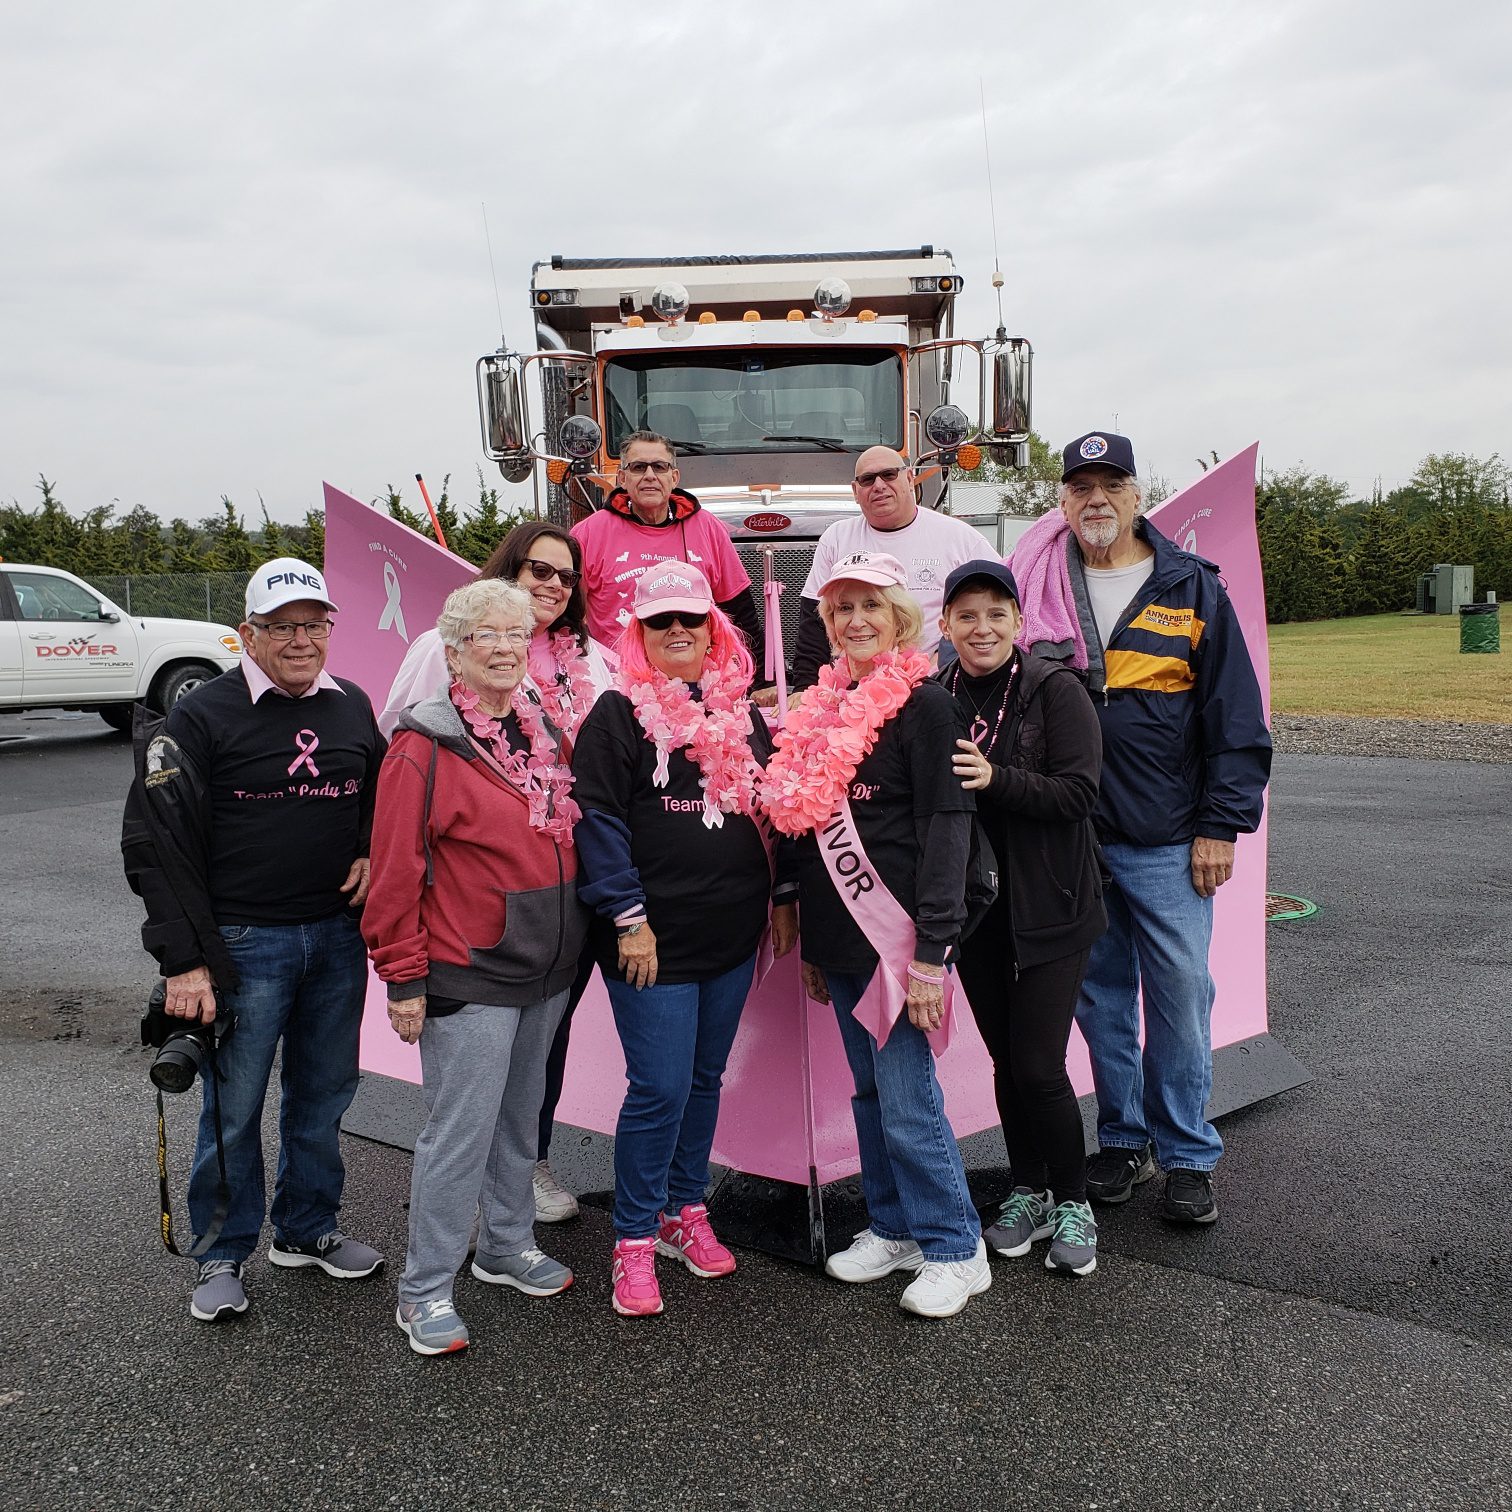 Featured image for “Many events planned for fall to promote breast cancer awareness”